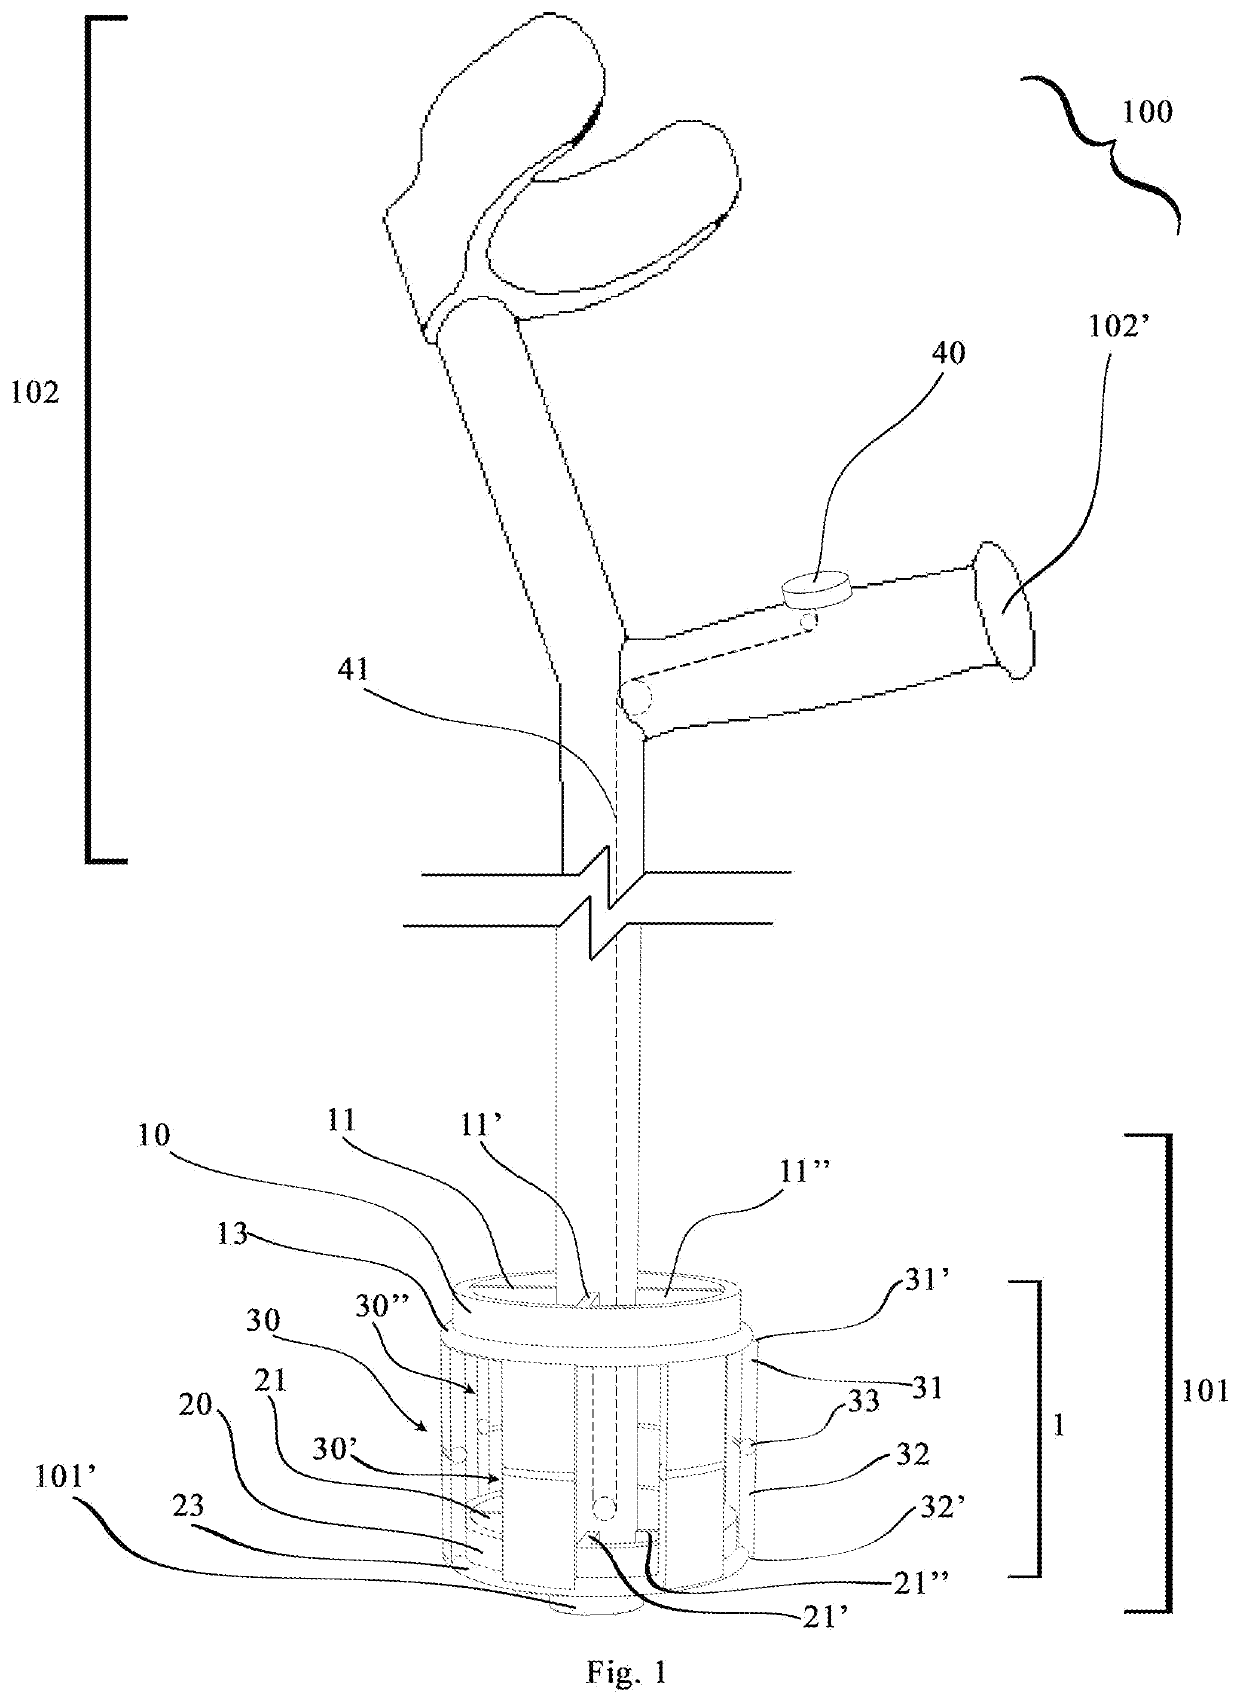 Non-slip self-supporting orthopedic device